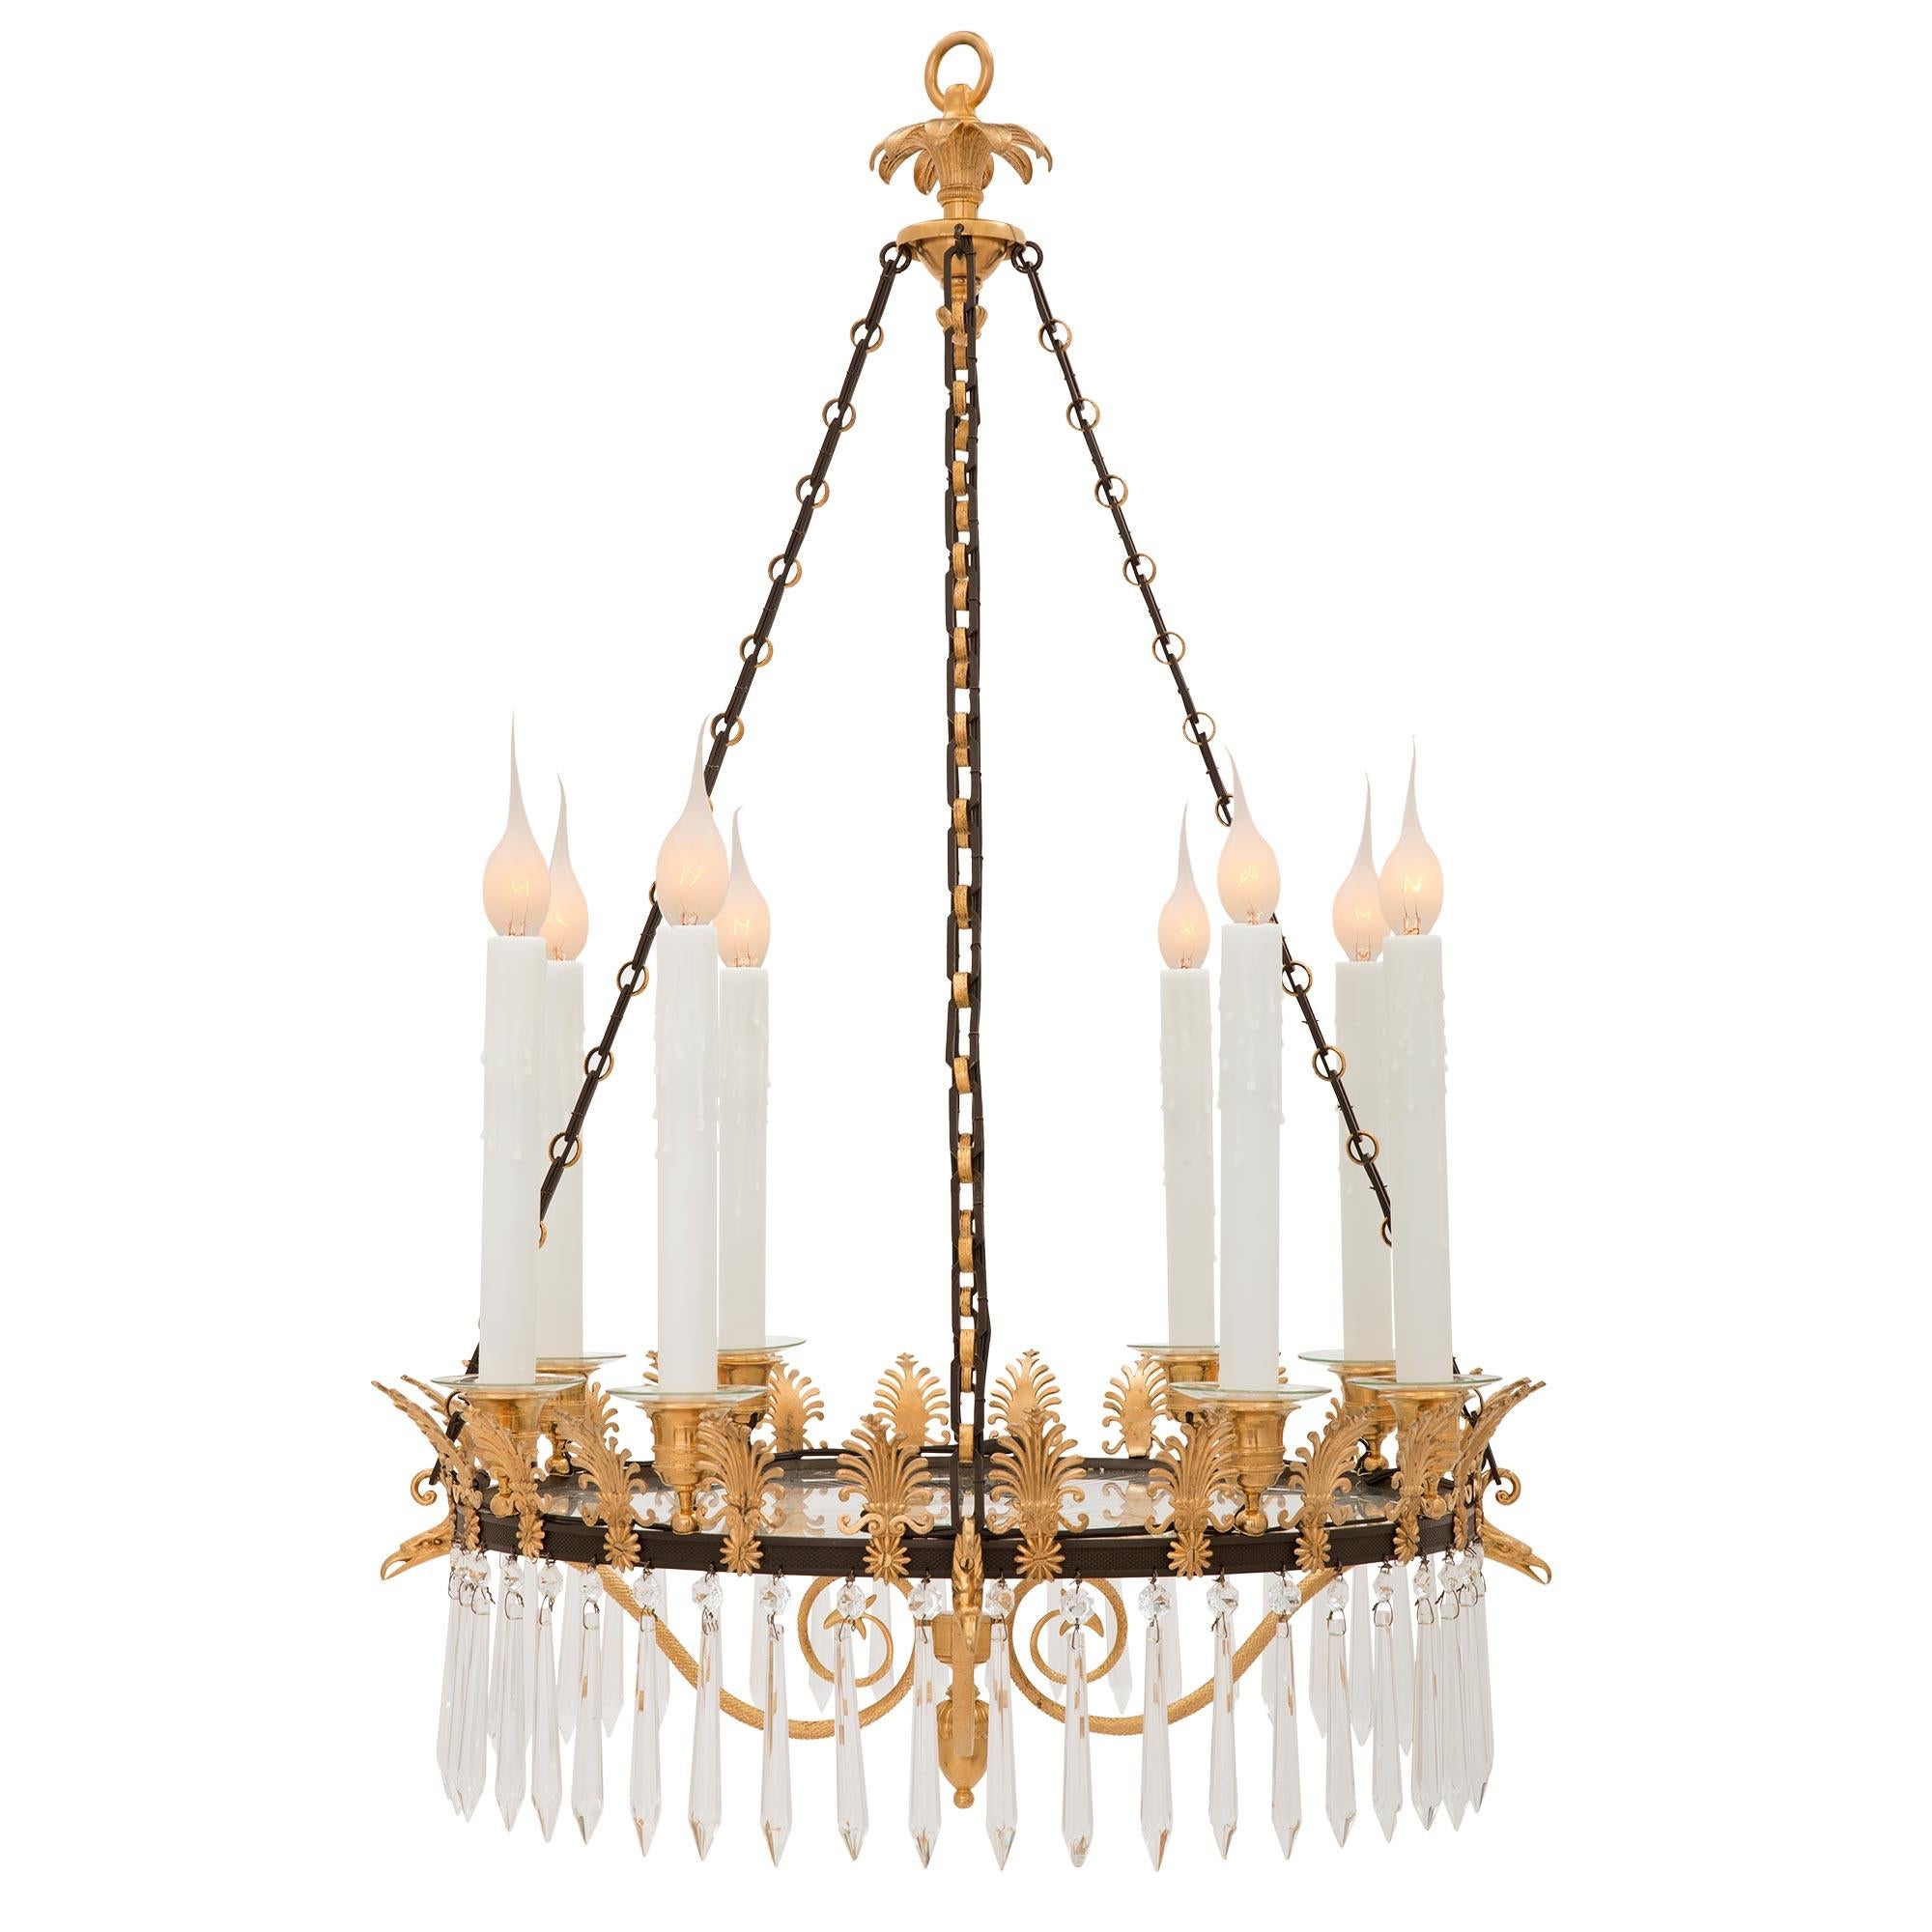 A stunning and very unique French 19th century neo-classical st. patinated bronze, ormolu, and Baccarat crystal chandelier. The eight arm chandelier is centered by a lovely bottom flower bud finial below beautiful scrolled ormolu movements with